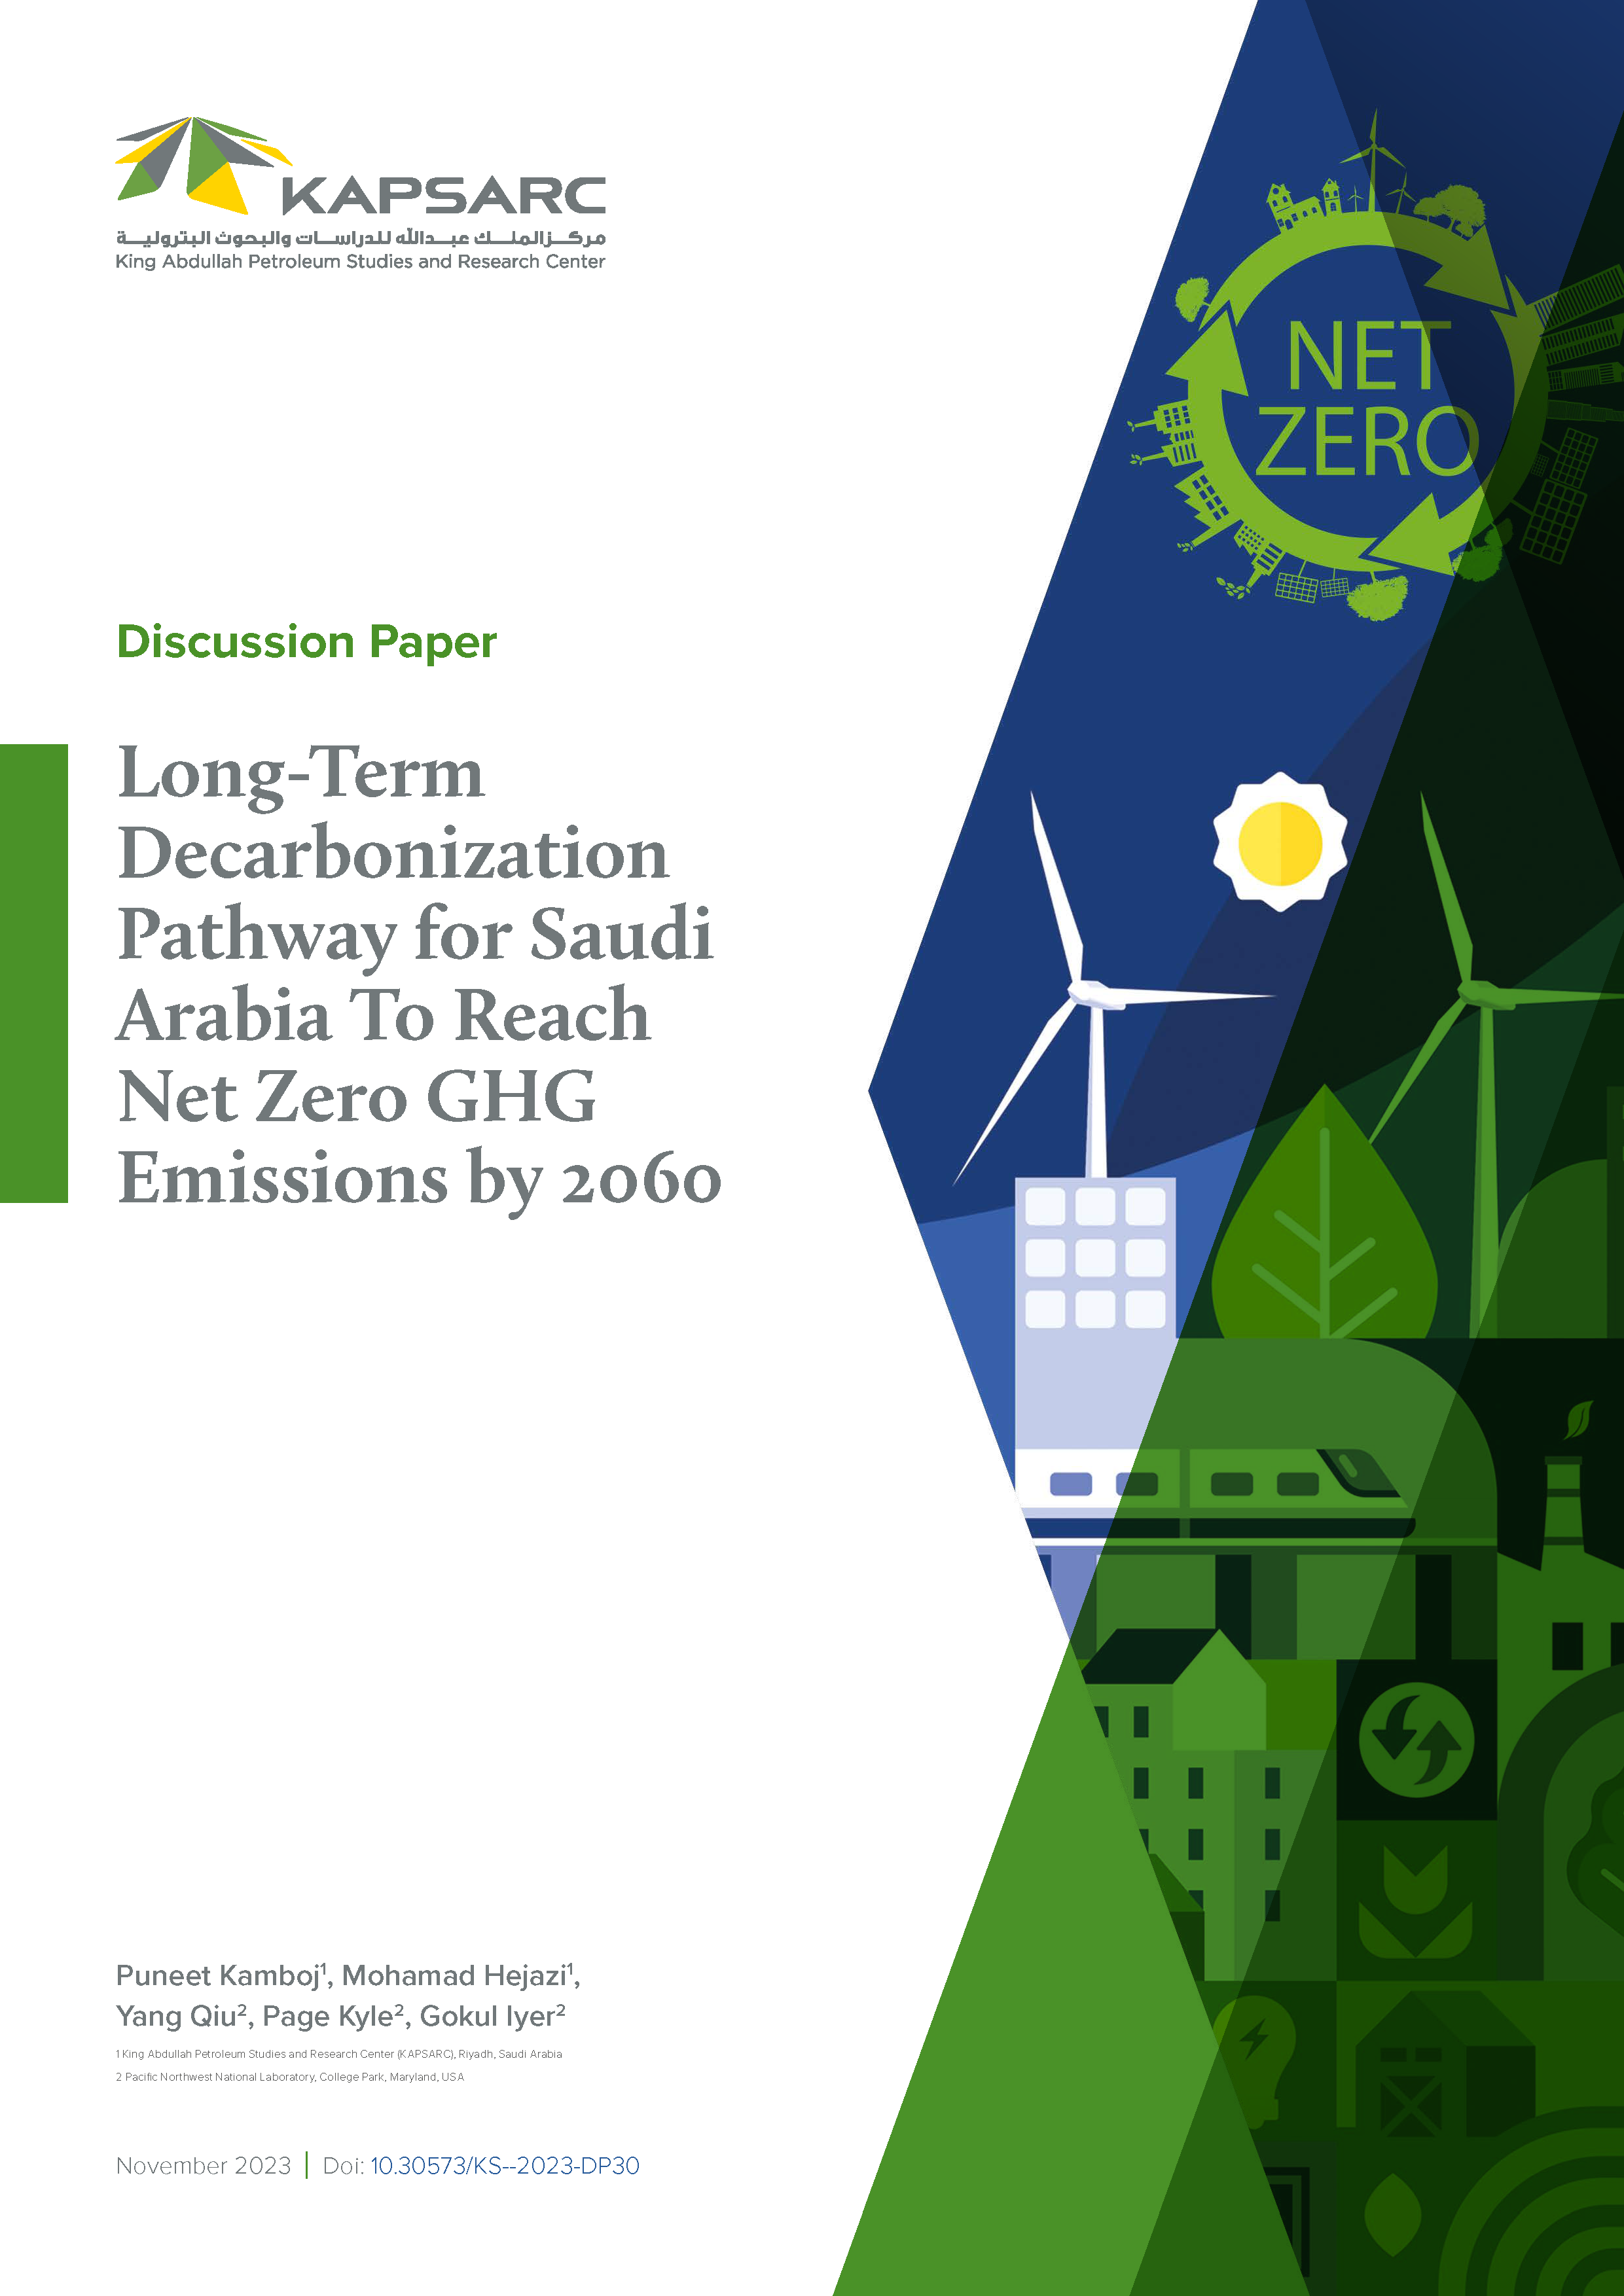 Long-Term Decarbonization Pathway for Saudi Arabia To Reach Net Zero GHG Emissions by 2060